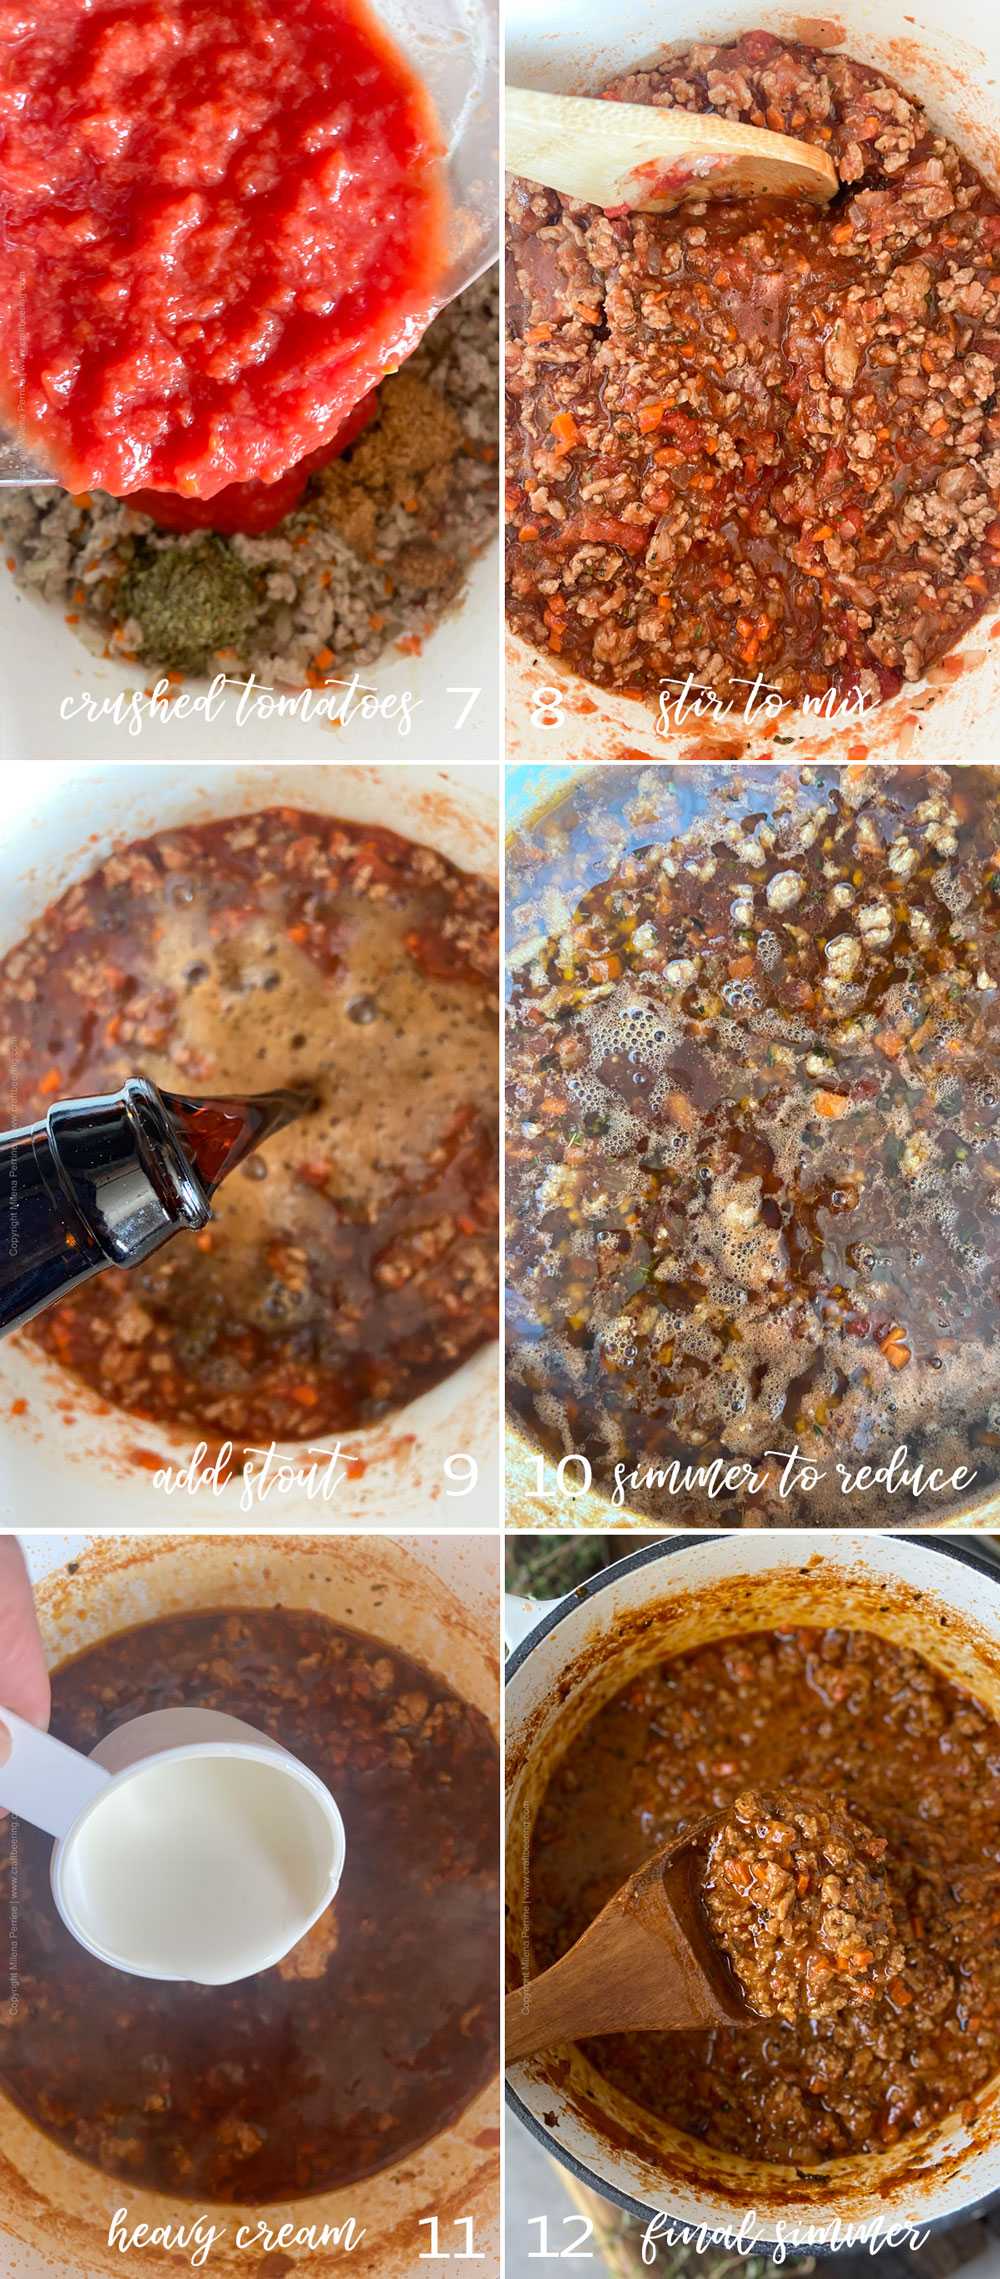 Pasta meat sauce with ground beef - step by step process, part 2. 